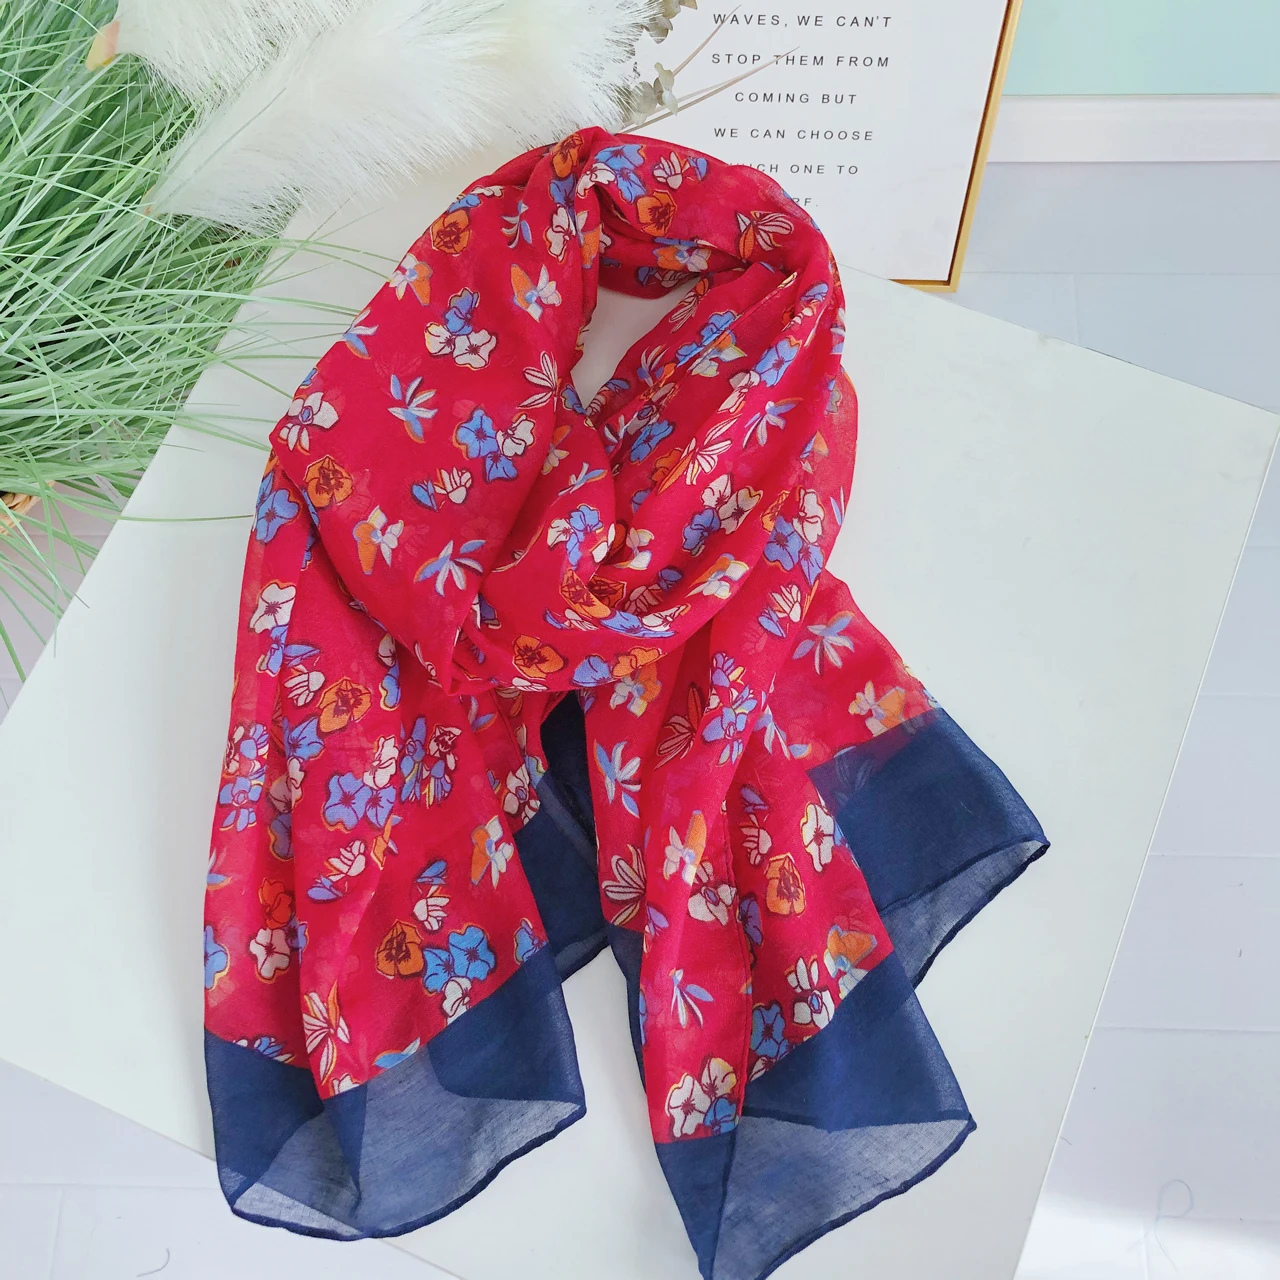 

2020 Fashion Small Floral Print Scarves Shawls Women Long Soft Blossom Ombre Flower Pattern Scarf Wrap Hijab Free Shipping